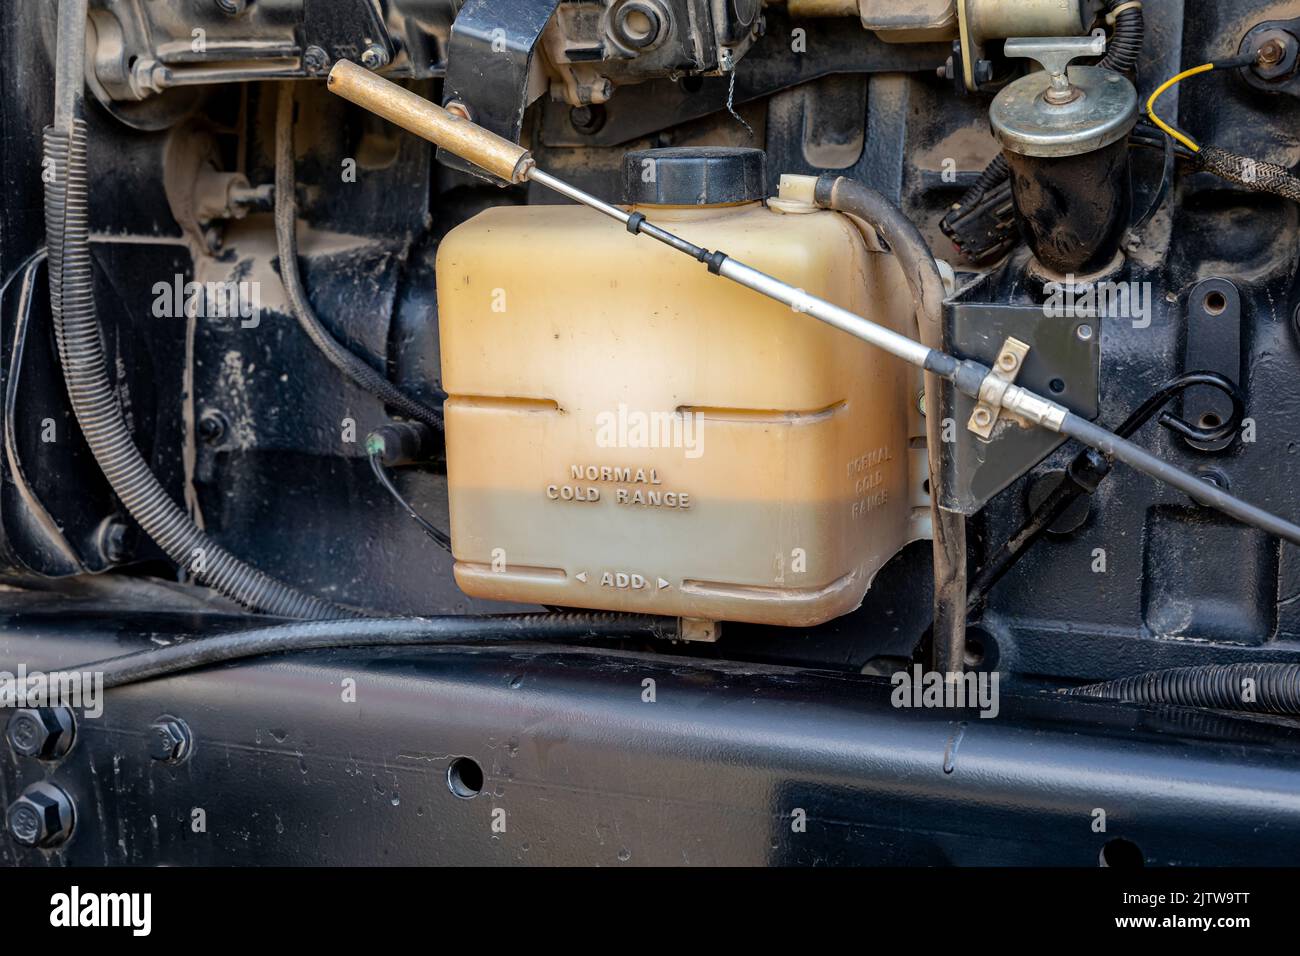 Antifreeze coolant tank on farm tractor cooling system. Agriculture and farming equipment repair, maintenance and service concept Stock Photo